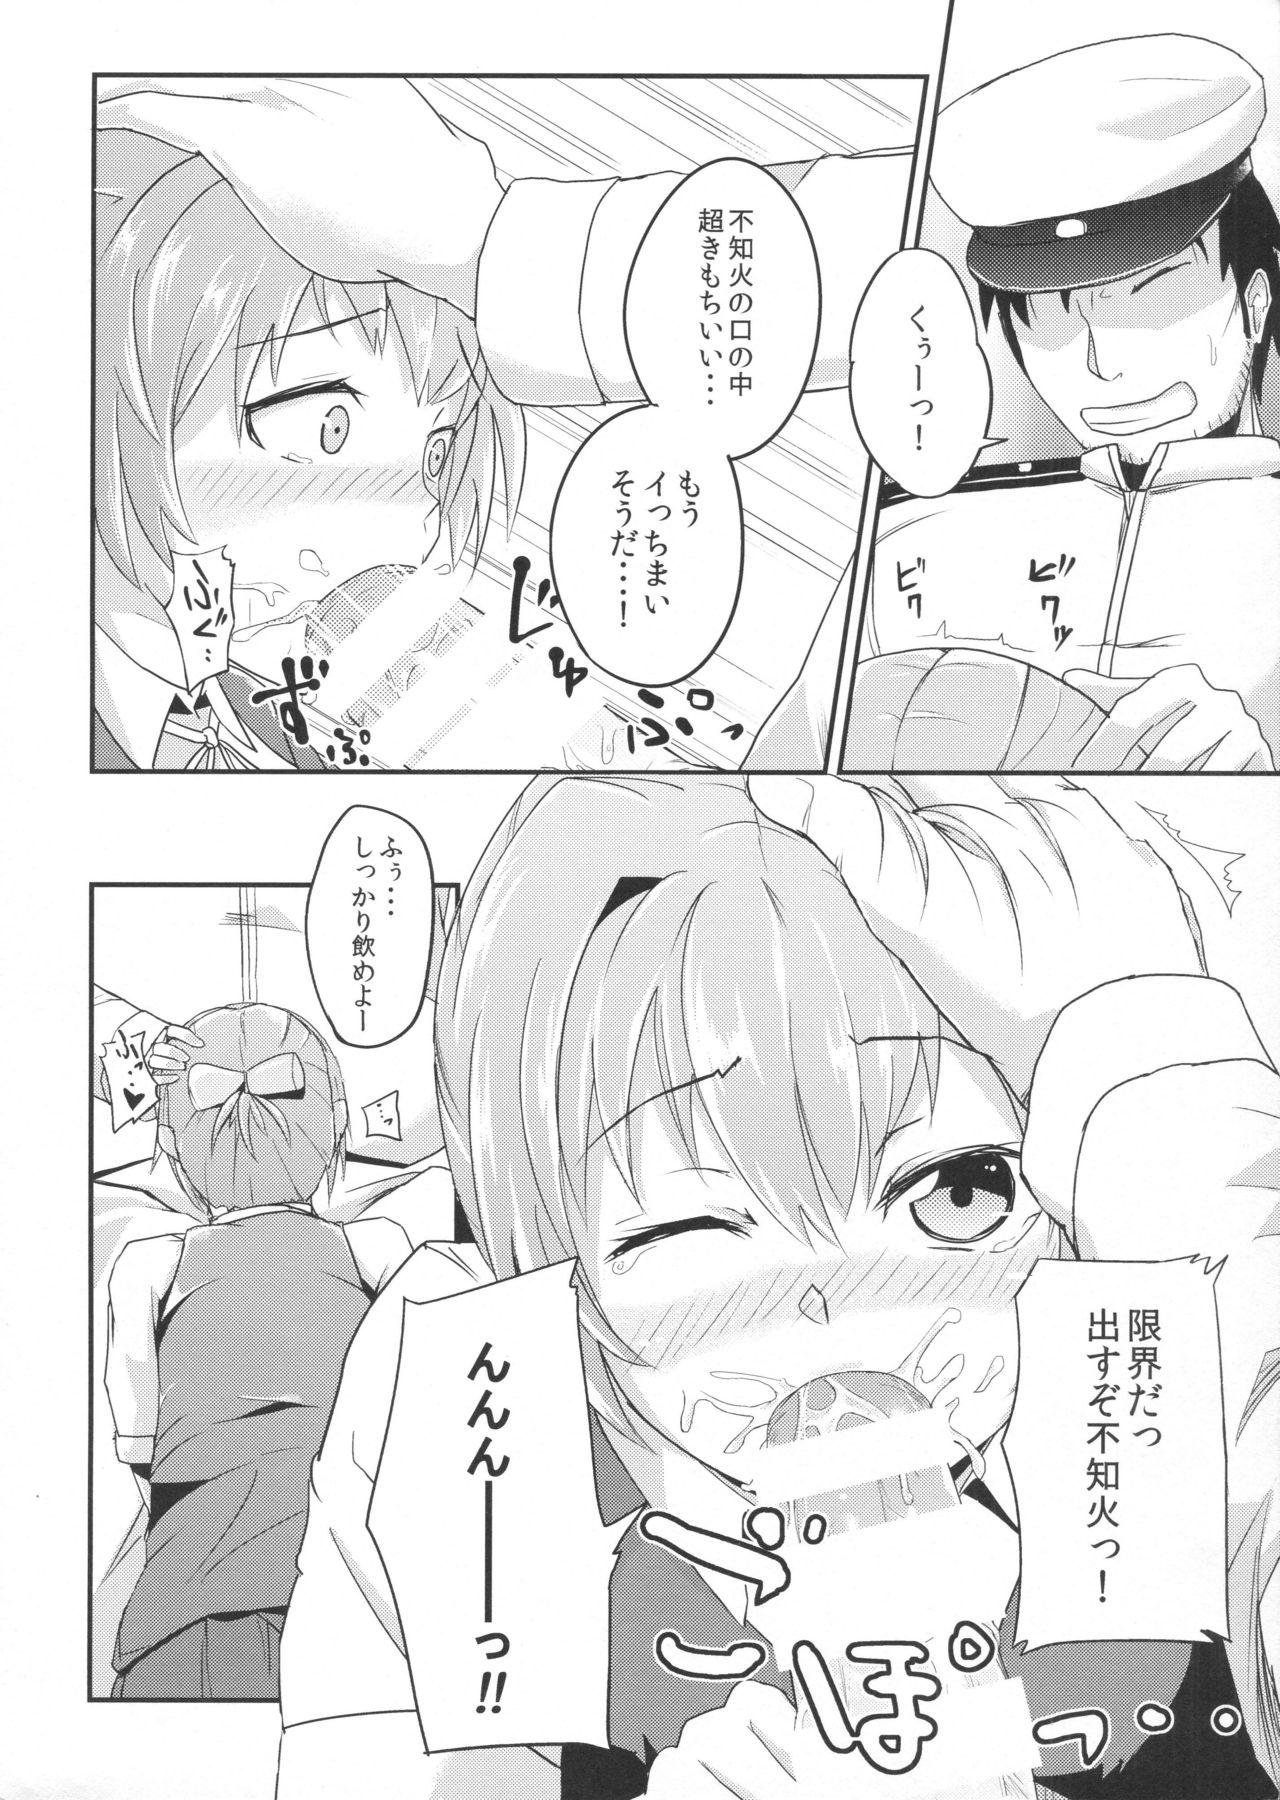 Farting Tsun to Dere Nui - Kantai collection Ex Girlfriend - Page 11